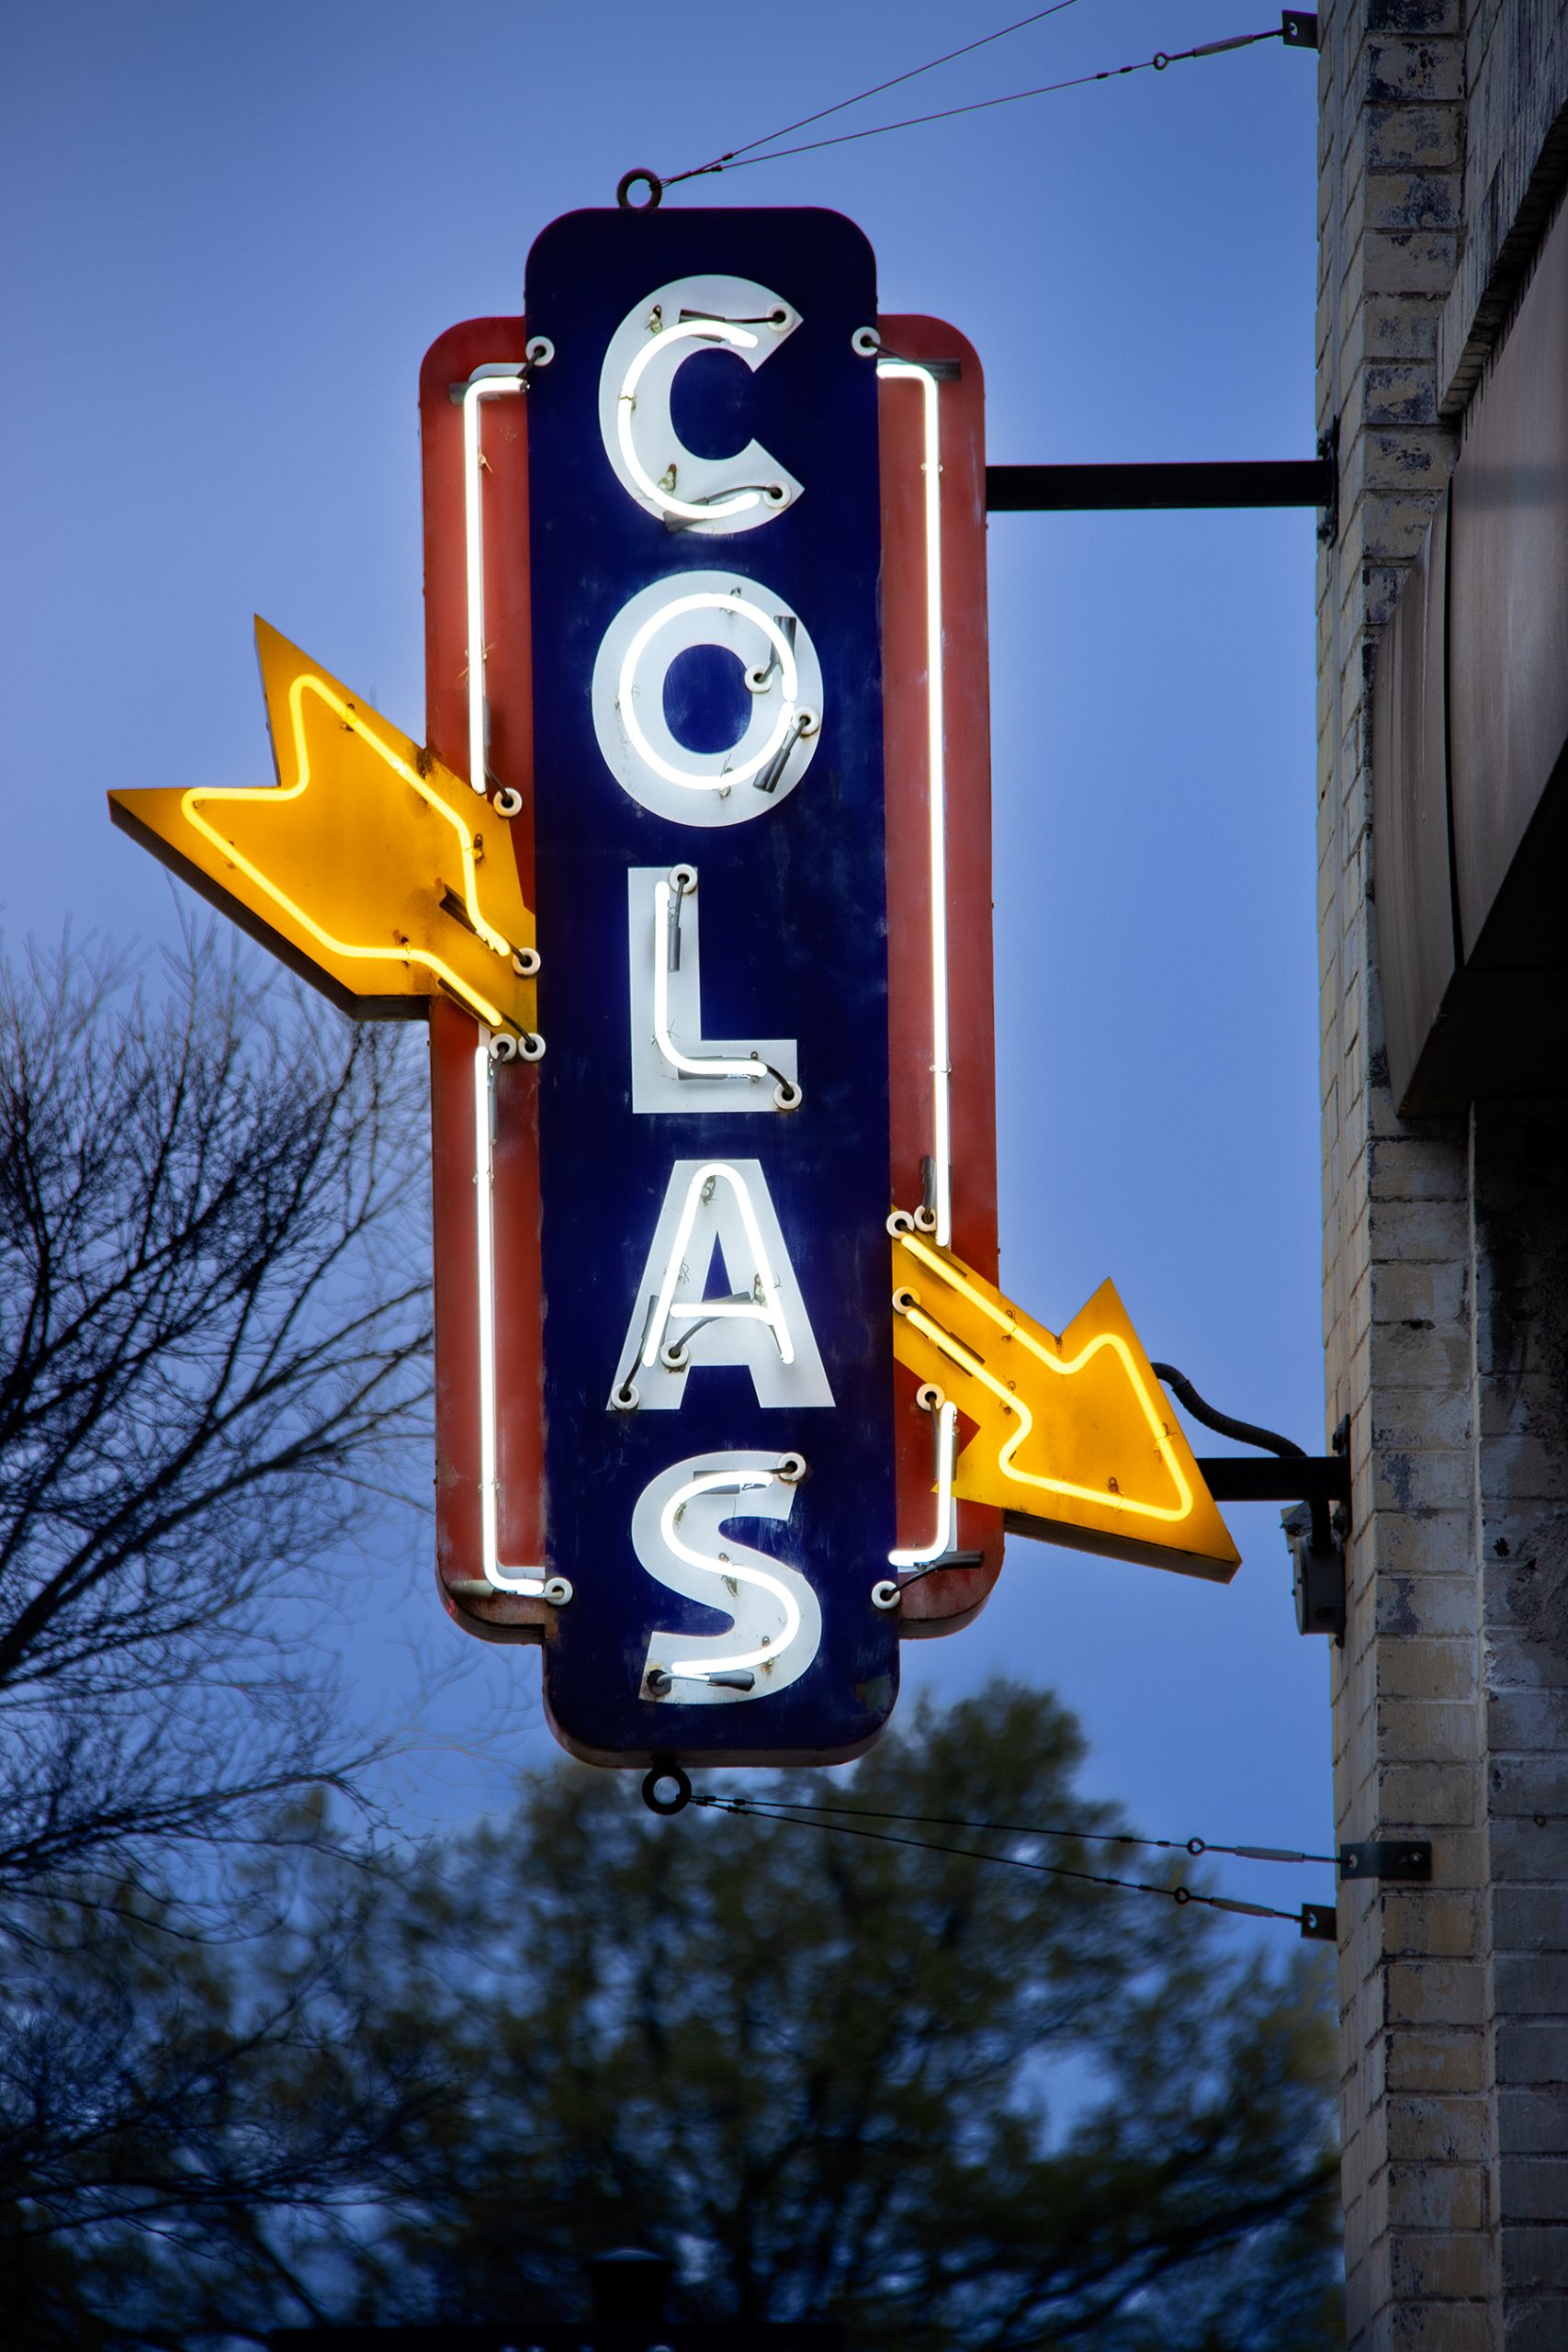 The largest use of neon is in advertising signage. Neon’s glow stands the test of time and catches the eye, drawing you to pay a visit. A cold glass of beer, a juicy burger, or warm buttered popcorn in an art-deco movie theatre — what better ways to advertise locations to satisfy evening cravings? 